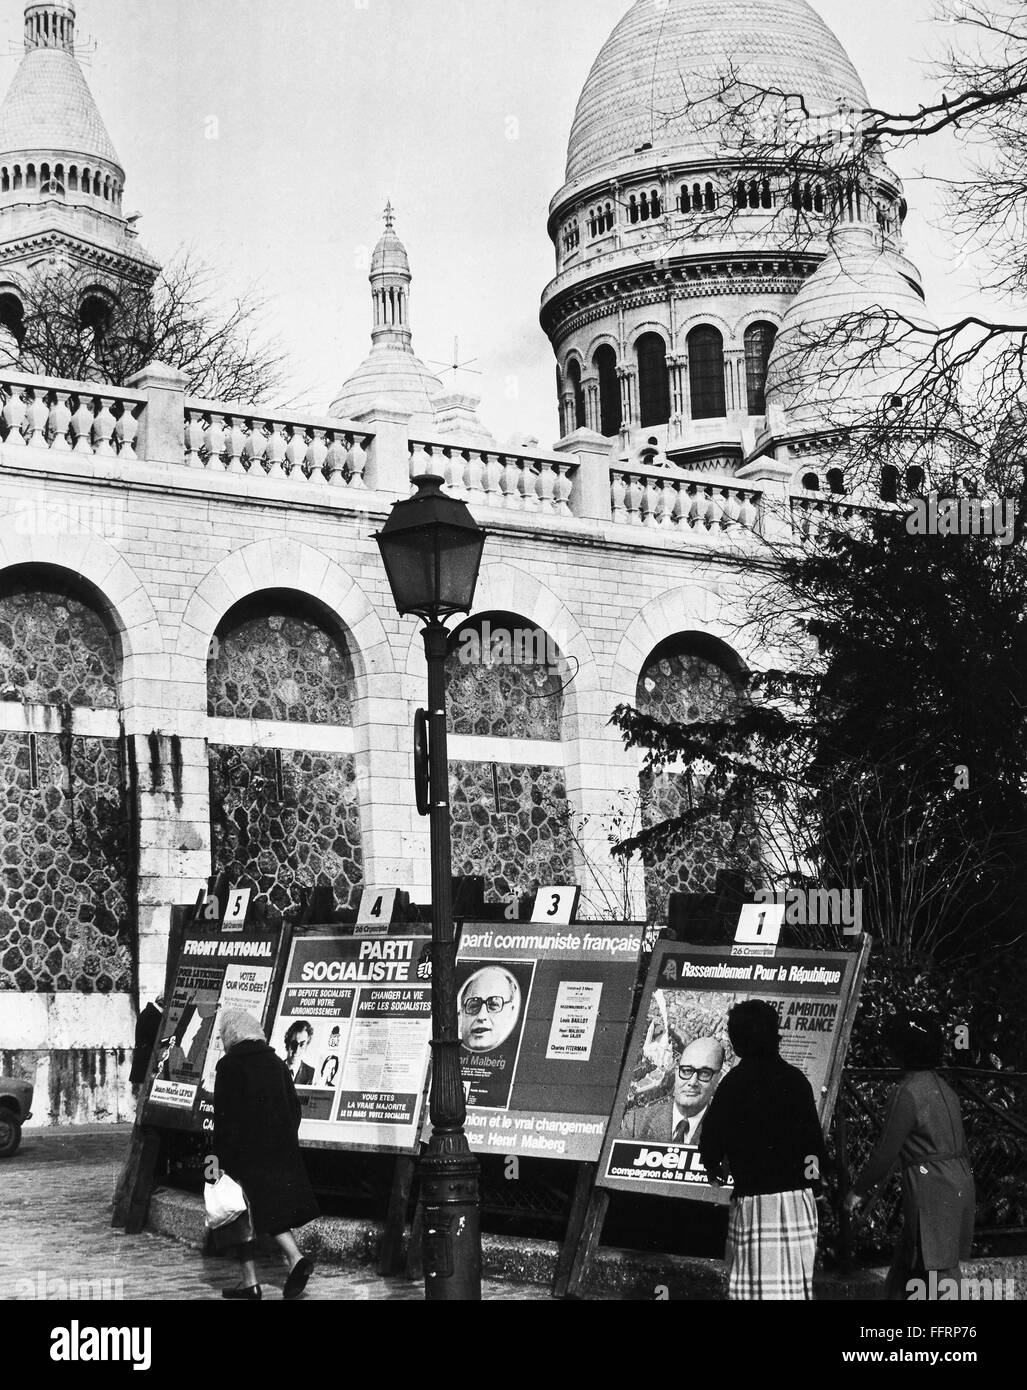 FRANCE: ELECTION, 1971. /nPolitical party posters for the national elections, March 1971, displayed evenly at Sacre Coeur Basilica in Montmartre, Paris. Stock Photo